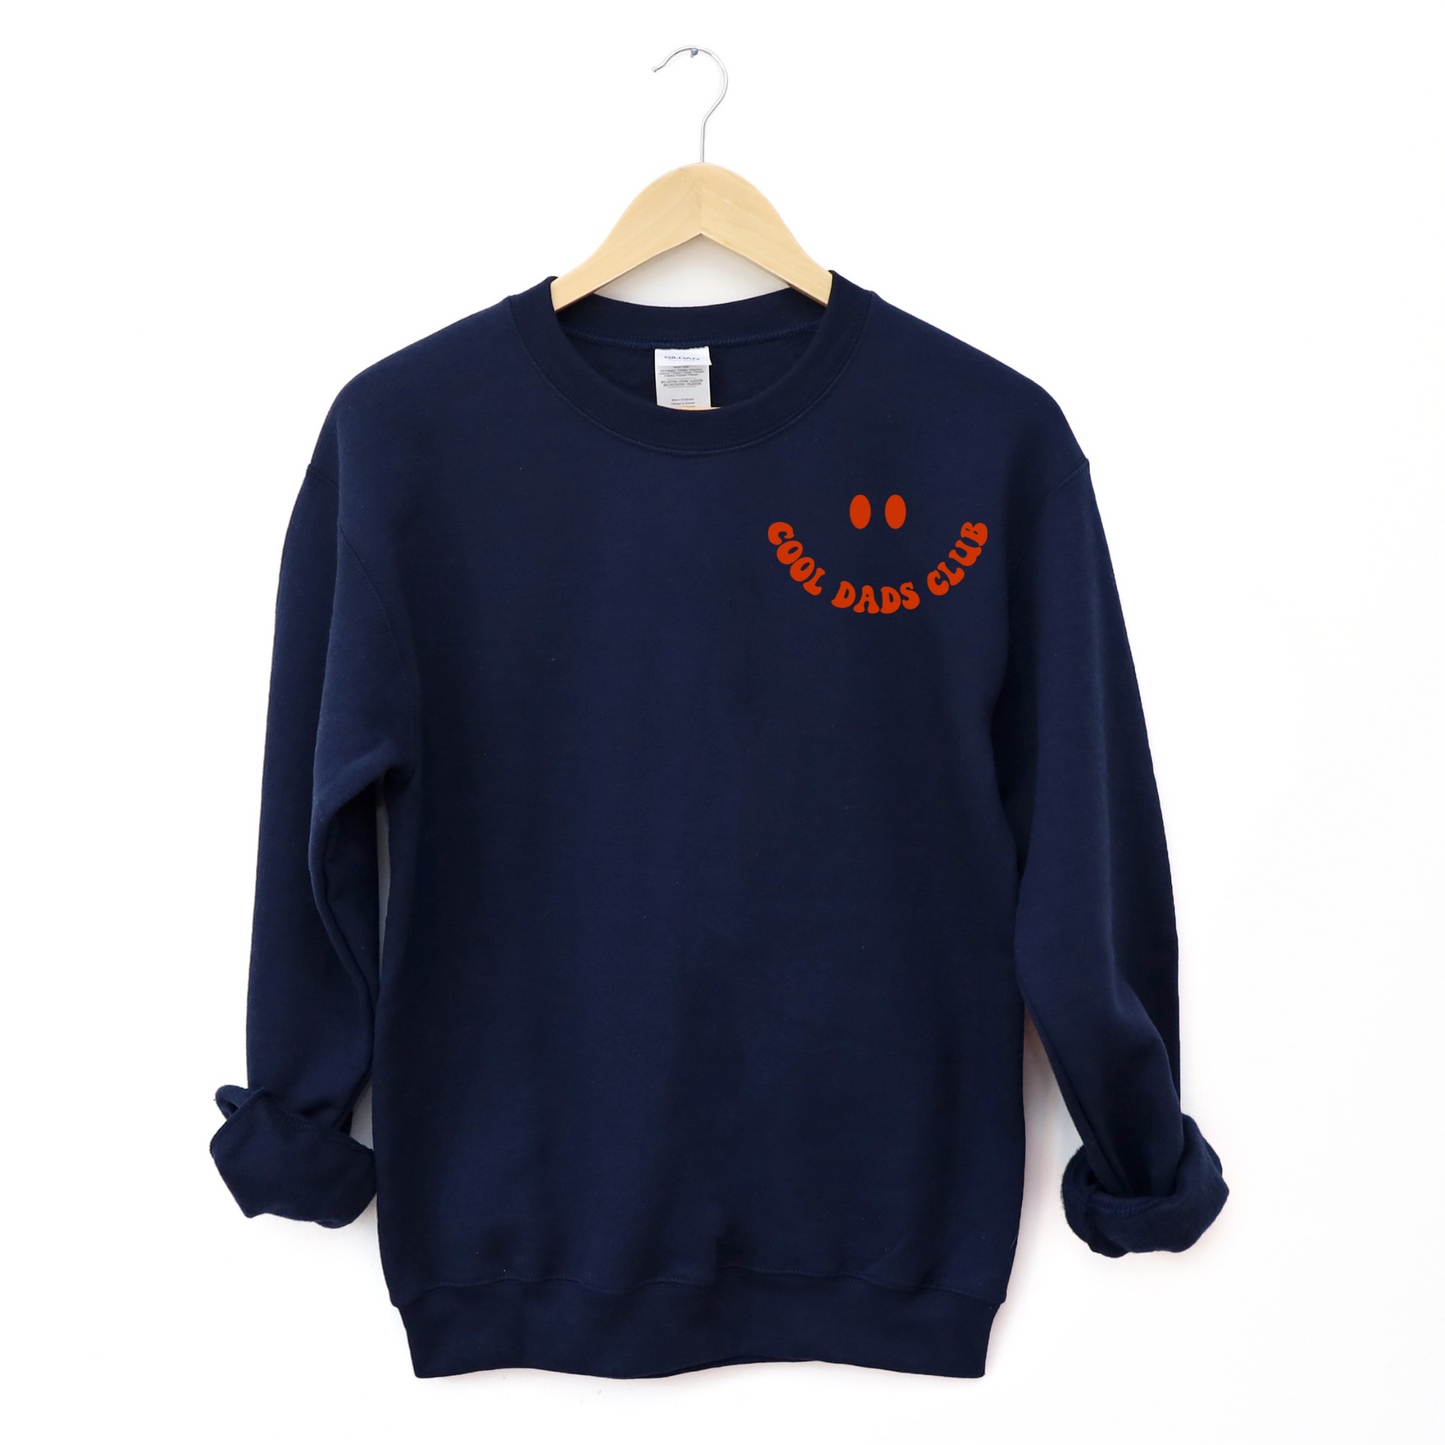 Cool Dads Club Crew Neck Sweater Navy Blue & Red